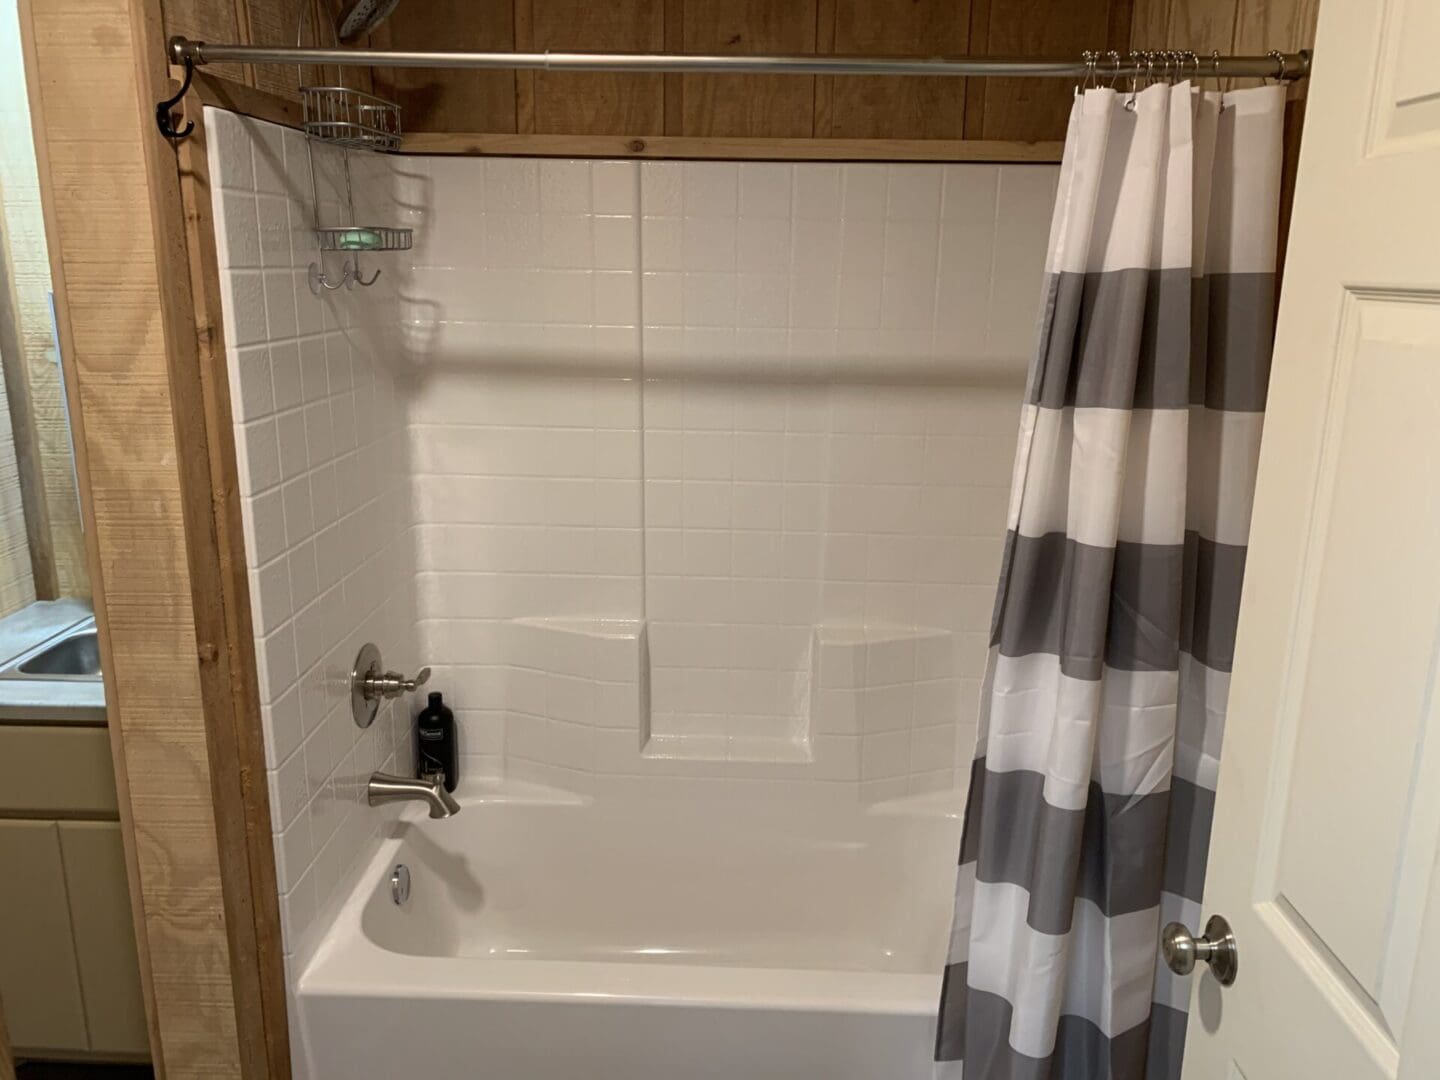 A bathroom with a shower and tub in it